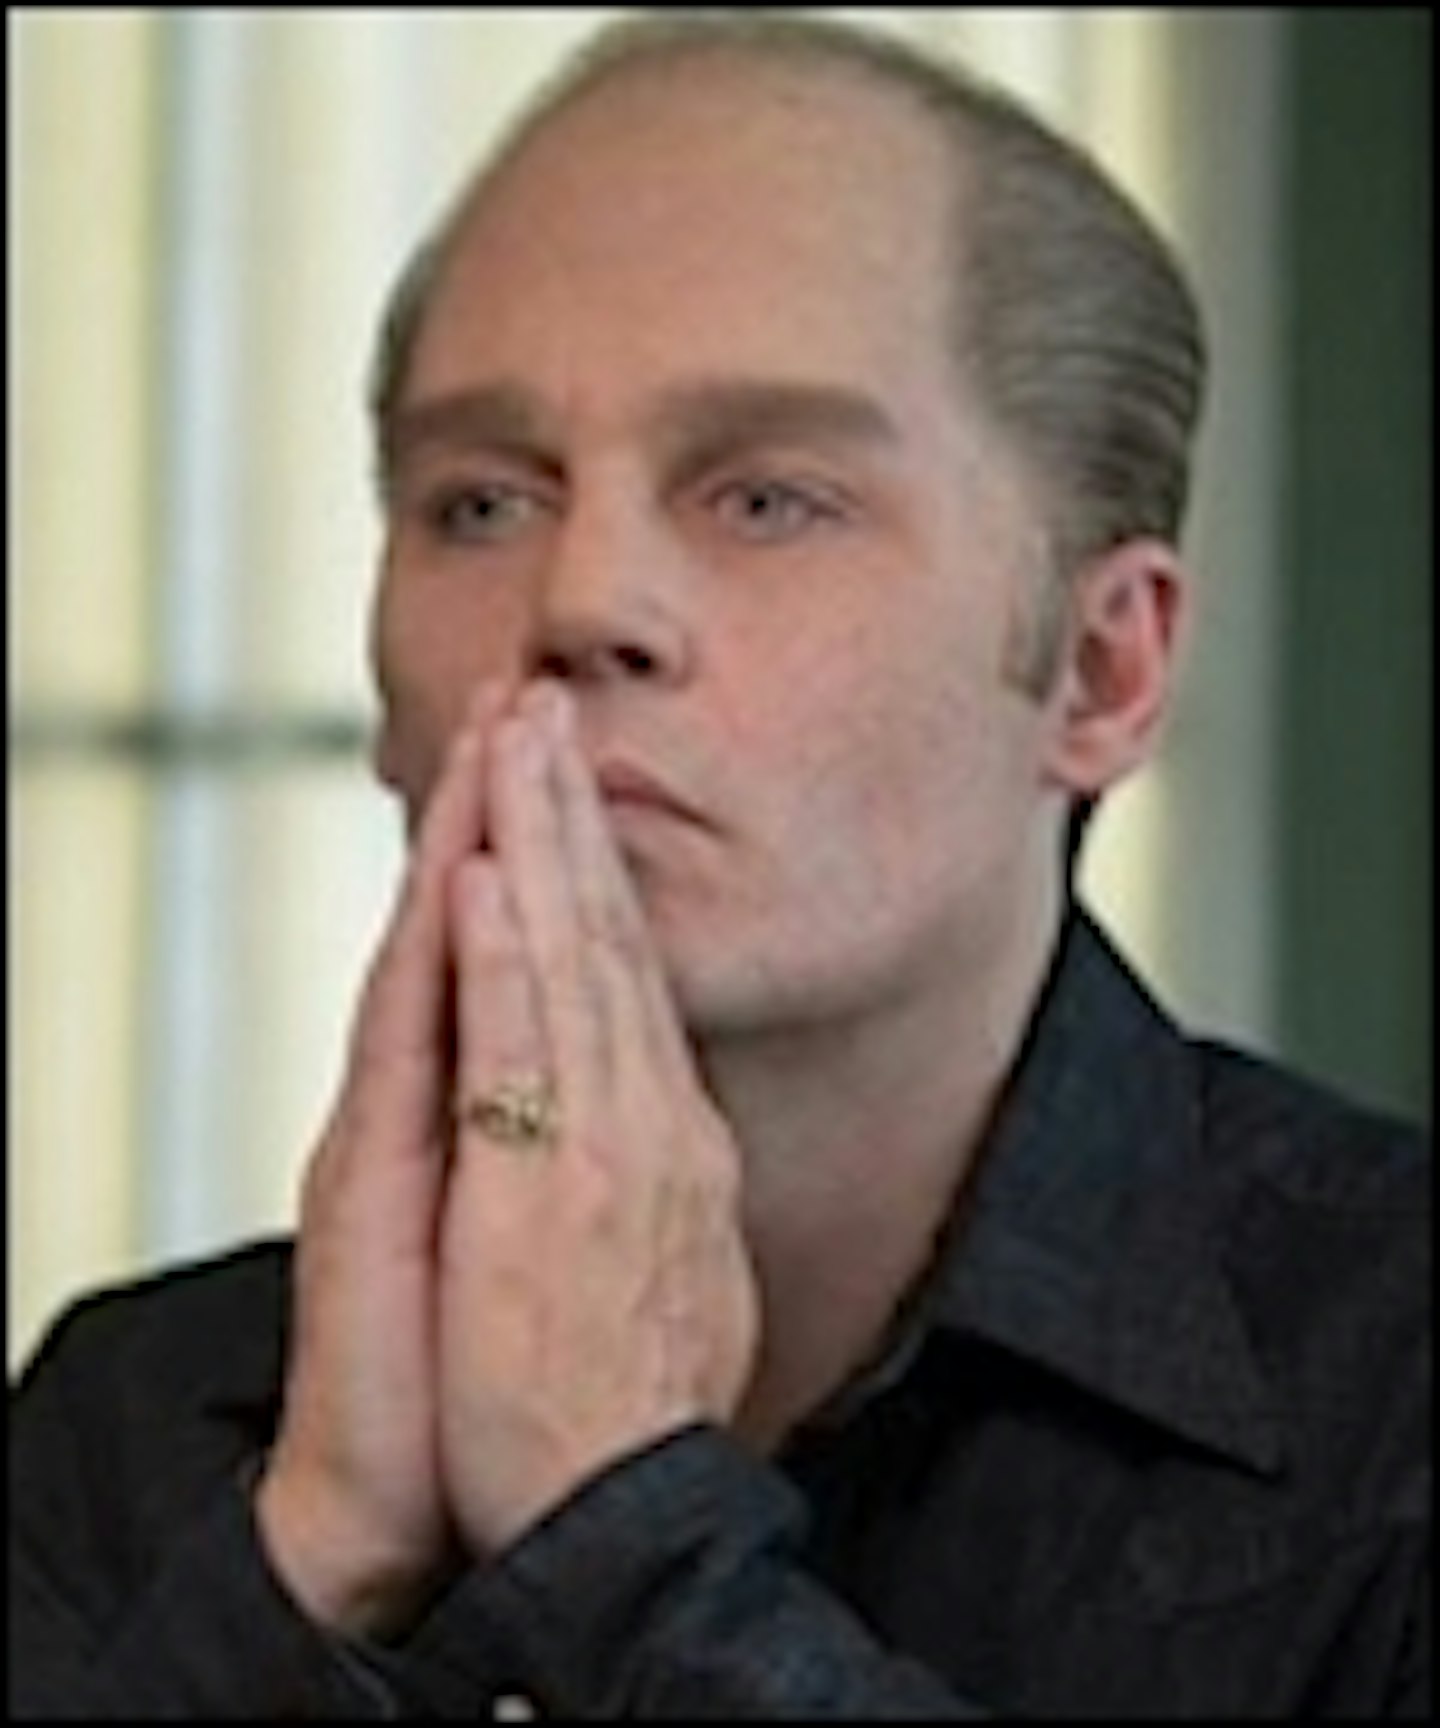 New Black Mass Trailer Has Life Lessons To Share